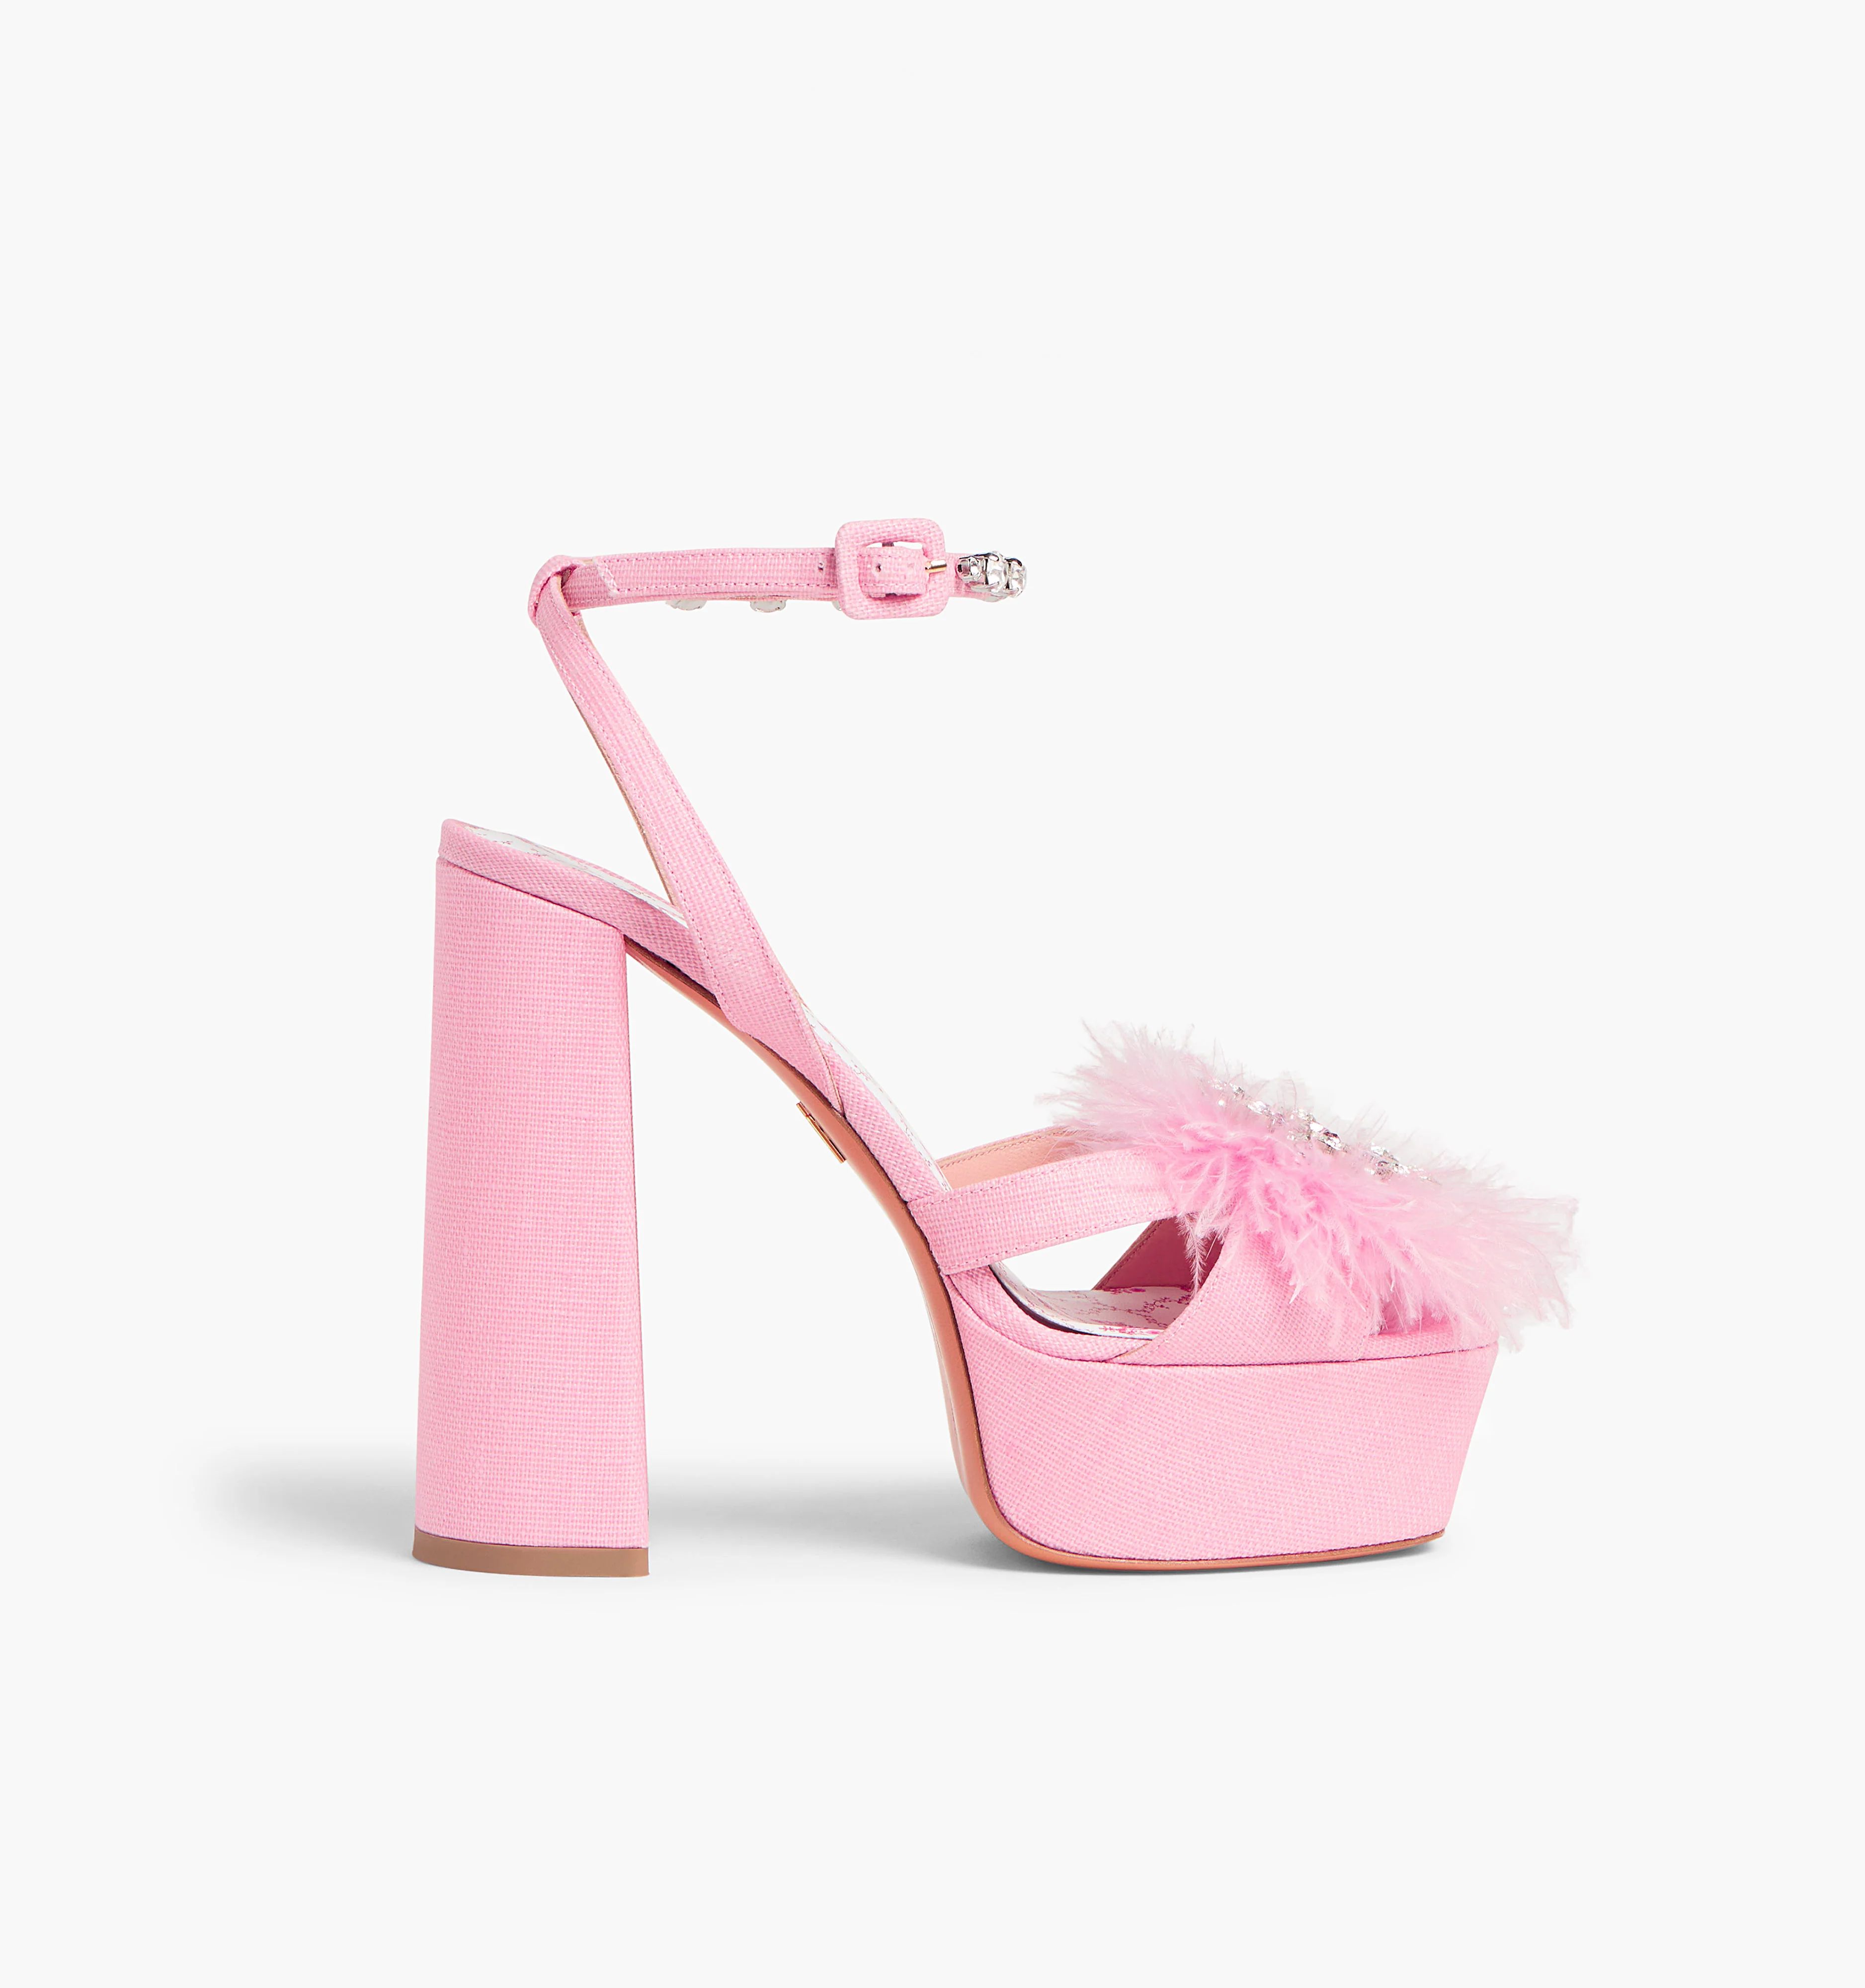 The Party Platform - Pink Feathers | Hill House Home